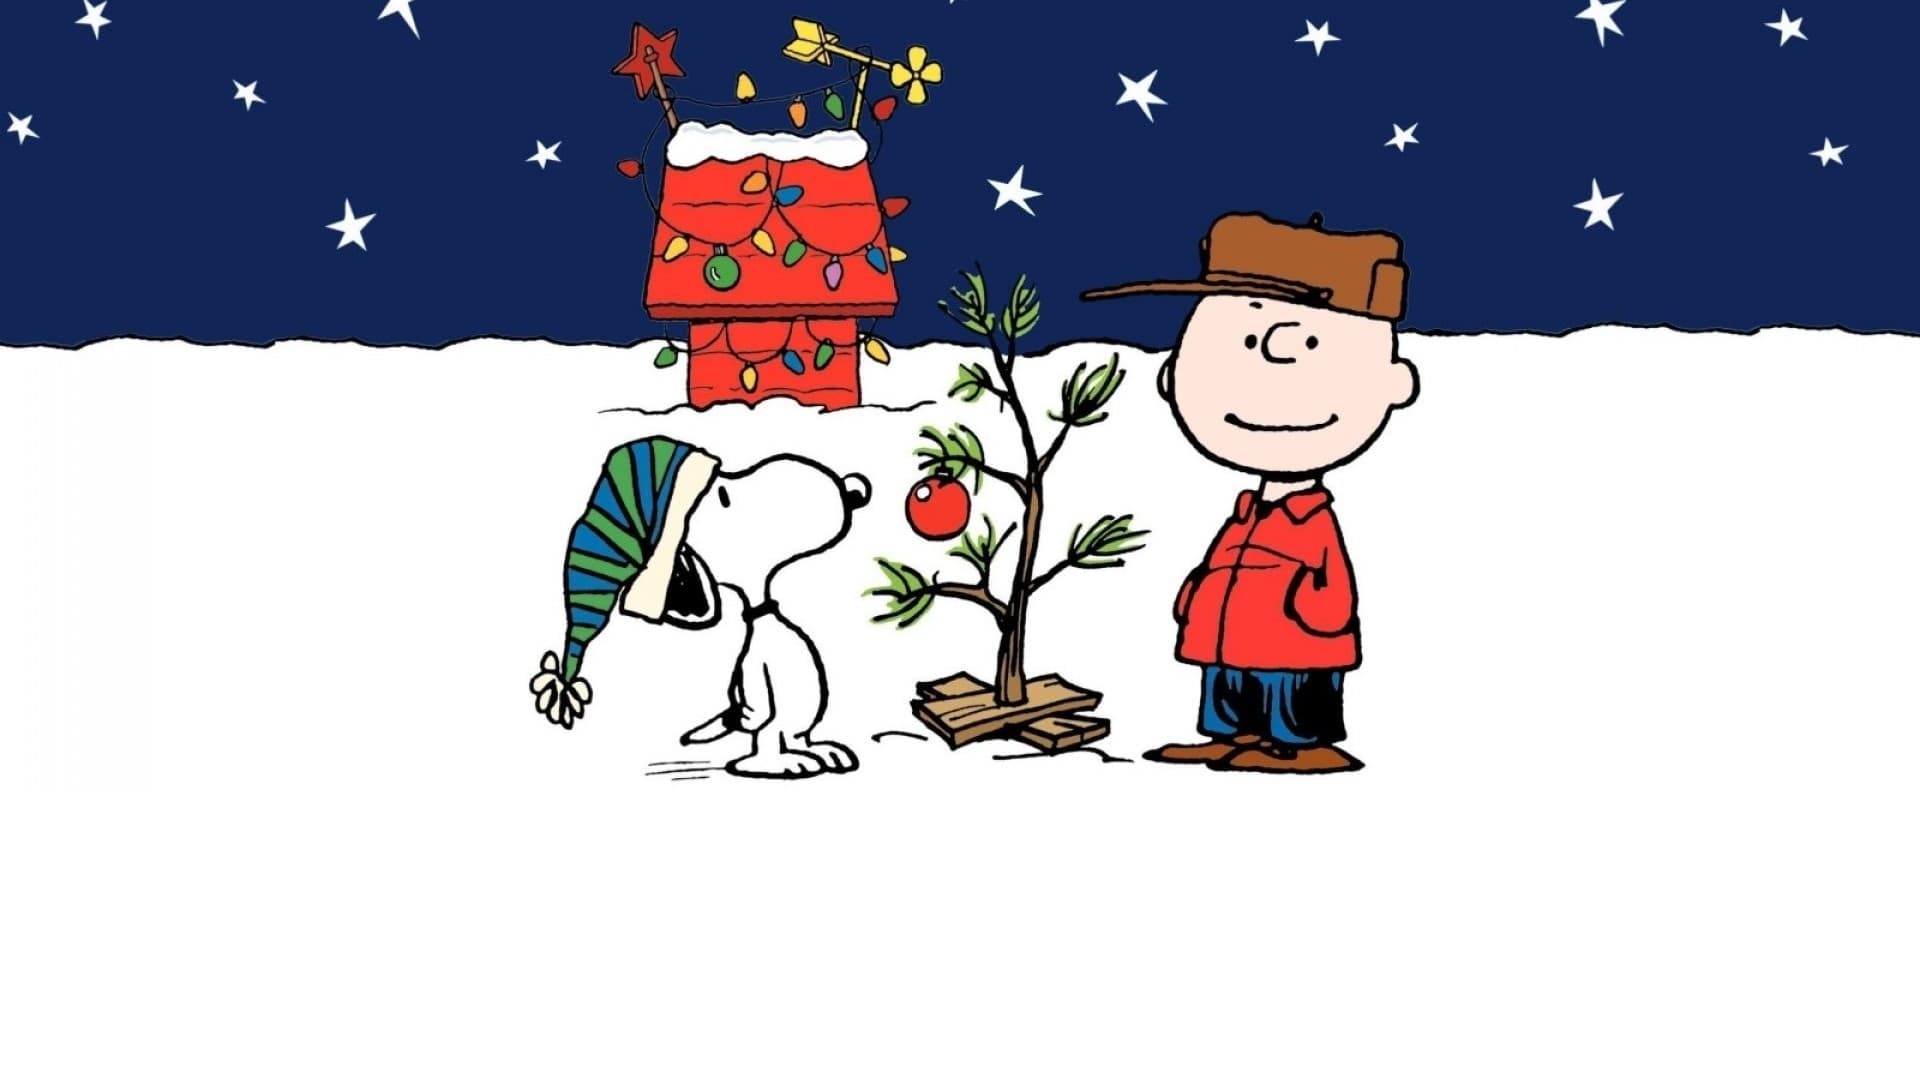 Charlie Brown Christmas wallpaper - Snoopy and Charlie Brown wallpaper - Peanuts wallpaper - Peanuts Christmas wallpaper - Christmas wallpaper - wallpaper - cartoon wallpaper - Snoopy wallpaper - Charlie Brown wallpaper - Peanuts wallpaper - Christmas wallpaper - wallpaper - cartoon wallpaper - Snoopy wallpaper - Charlie Brown wallpaper - Peanuts wallpaper - Christmas wallpaper - wallpaper - cartoon wallpaper - Charlie Brown